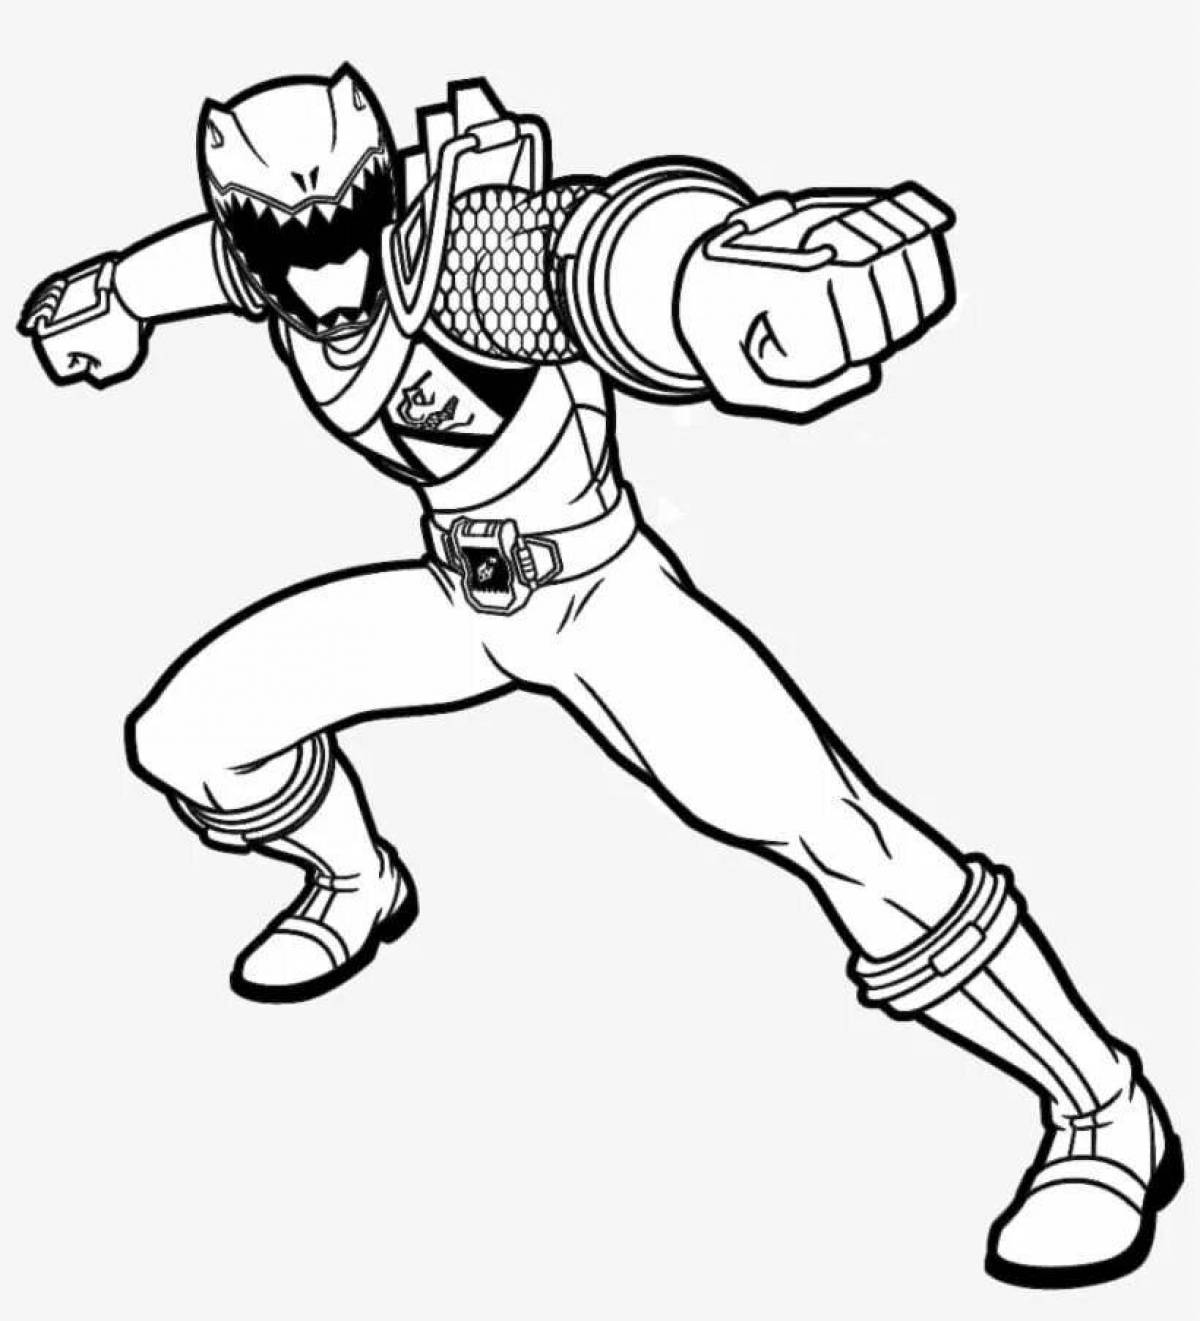 Fabulous Power Rangers coloring page